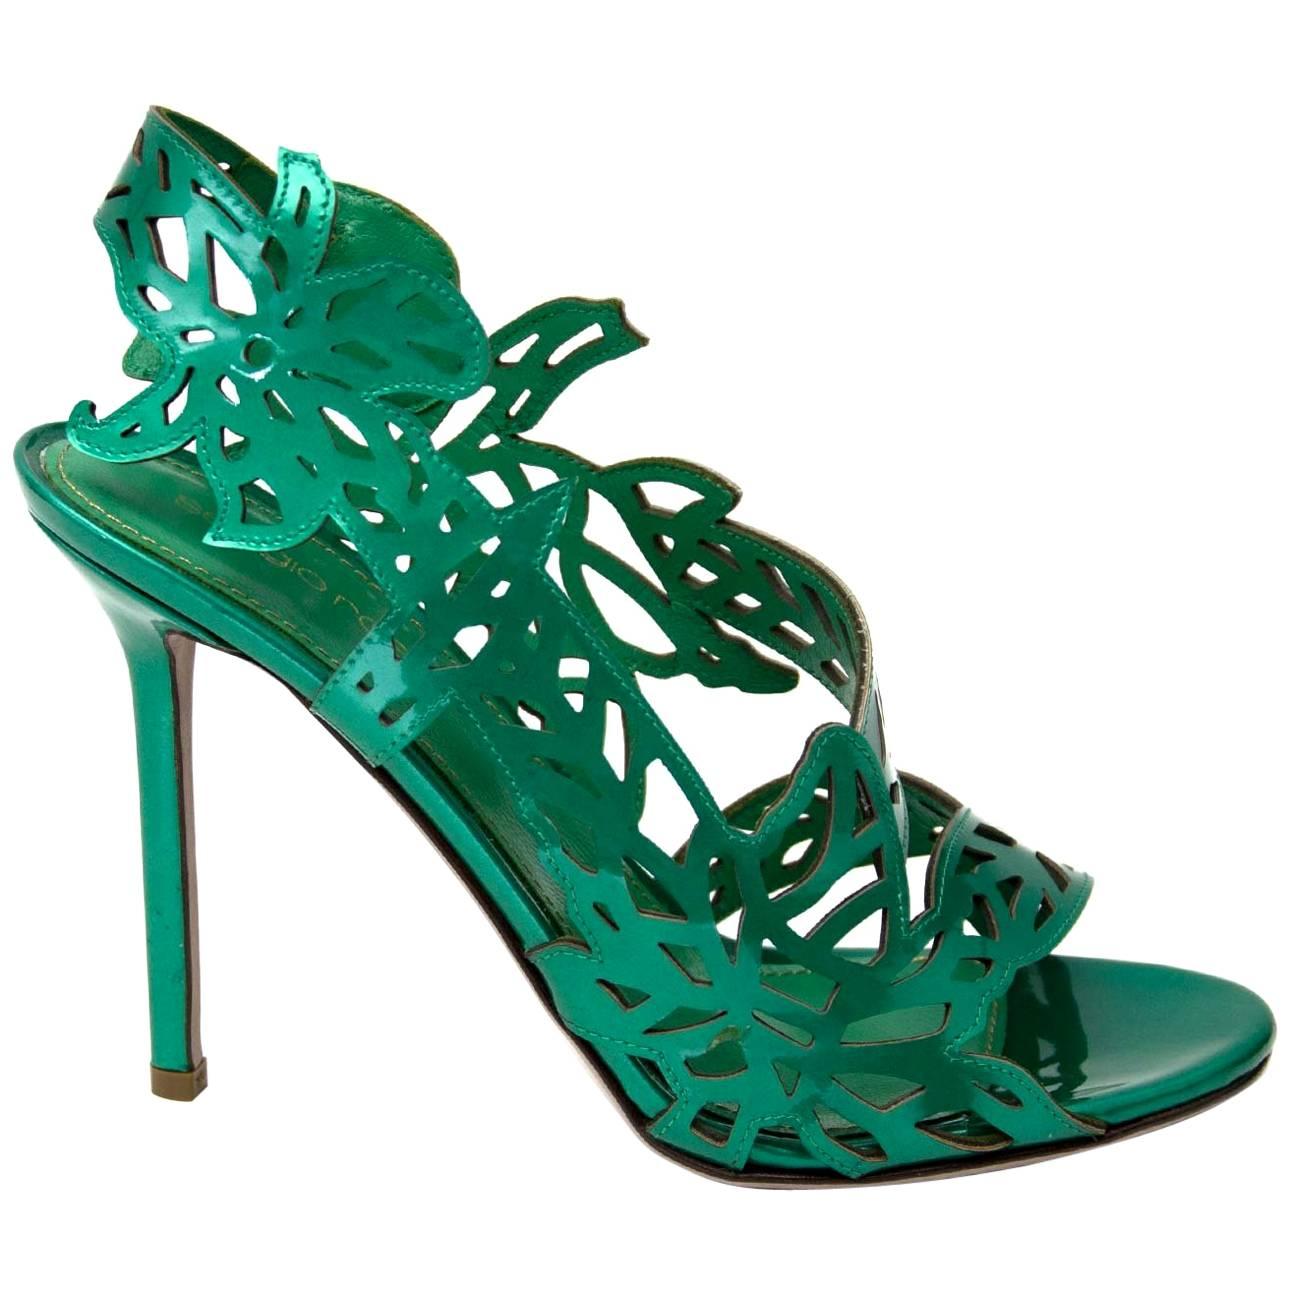 ﻿﻿Sergio Rossi Patent Green Cut-Out Sandals  For Sale